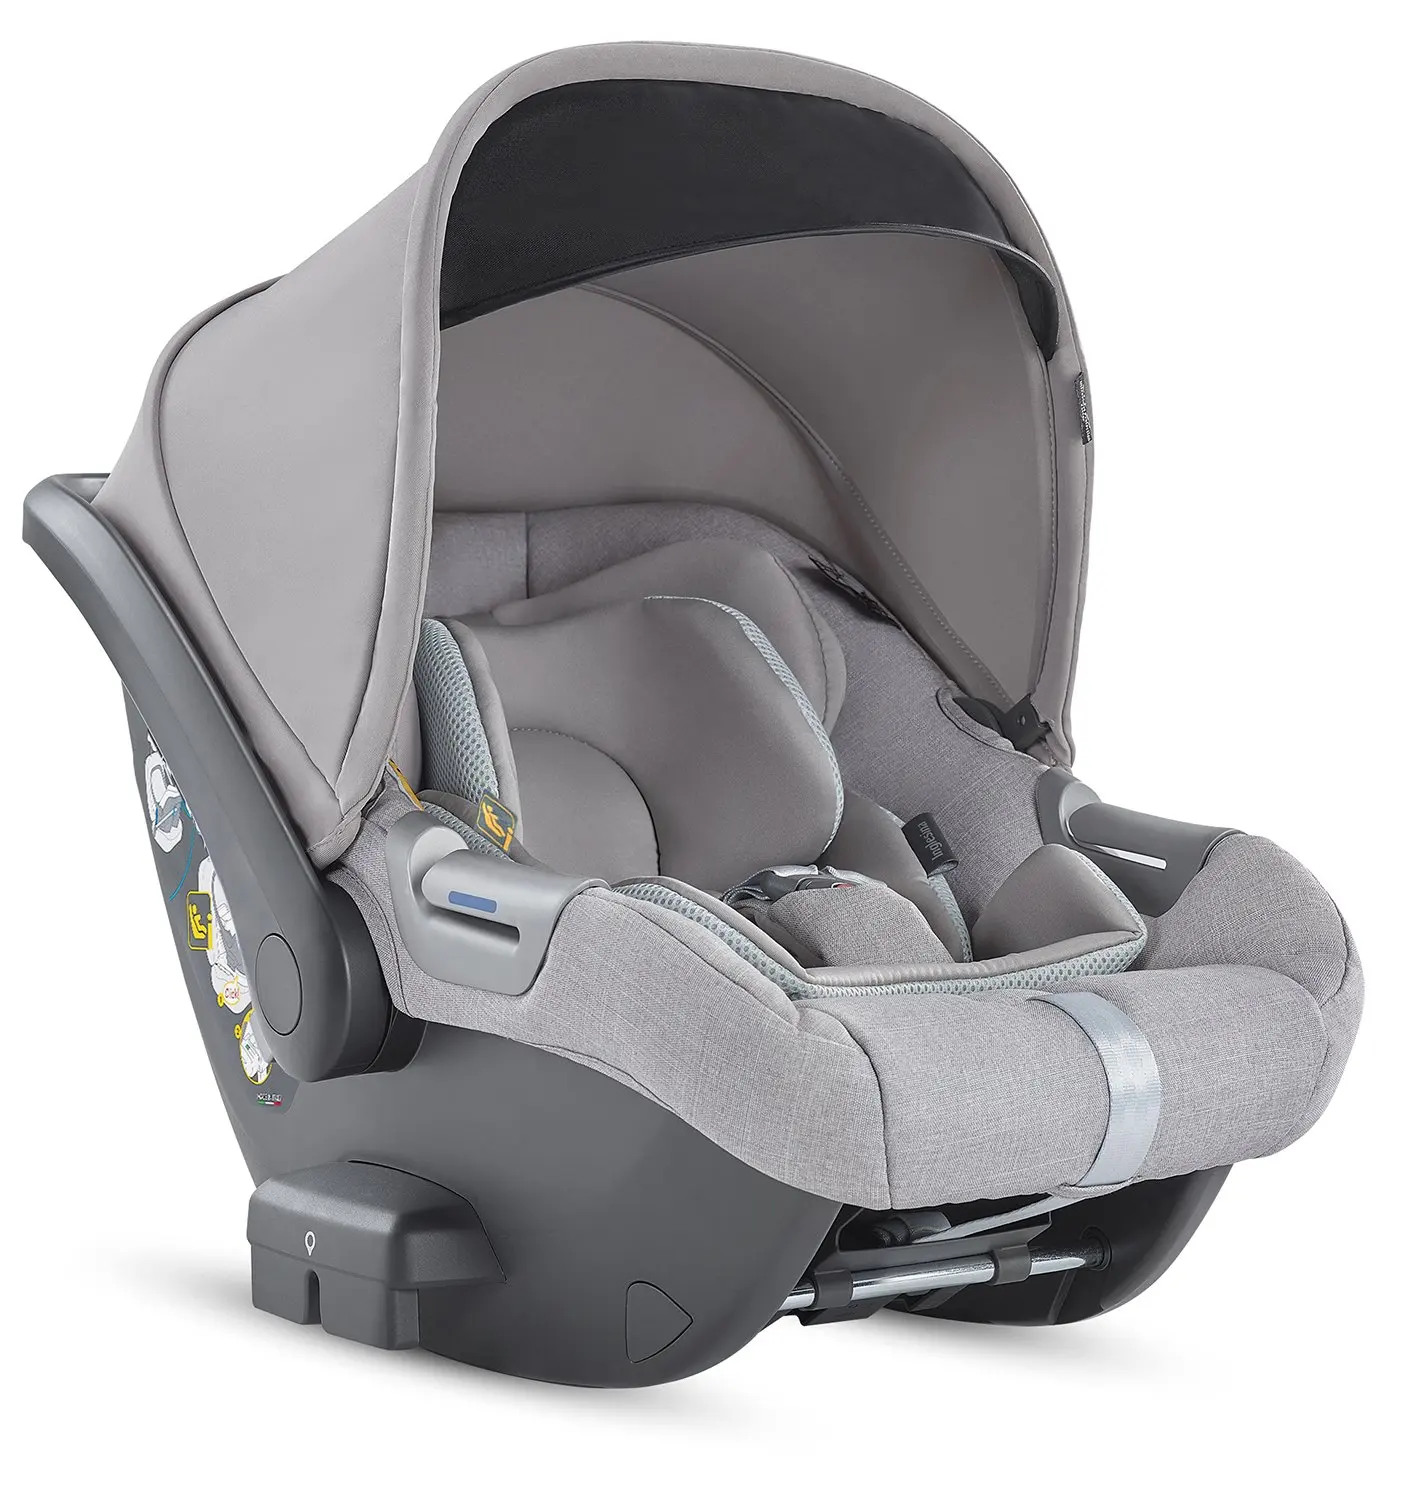 Safety Adjustable Baby Car Seat Cover 